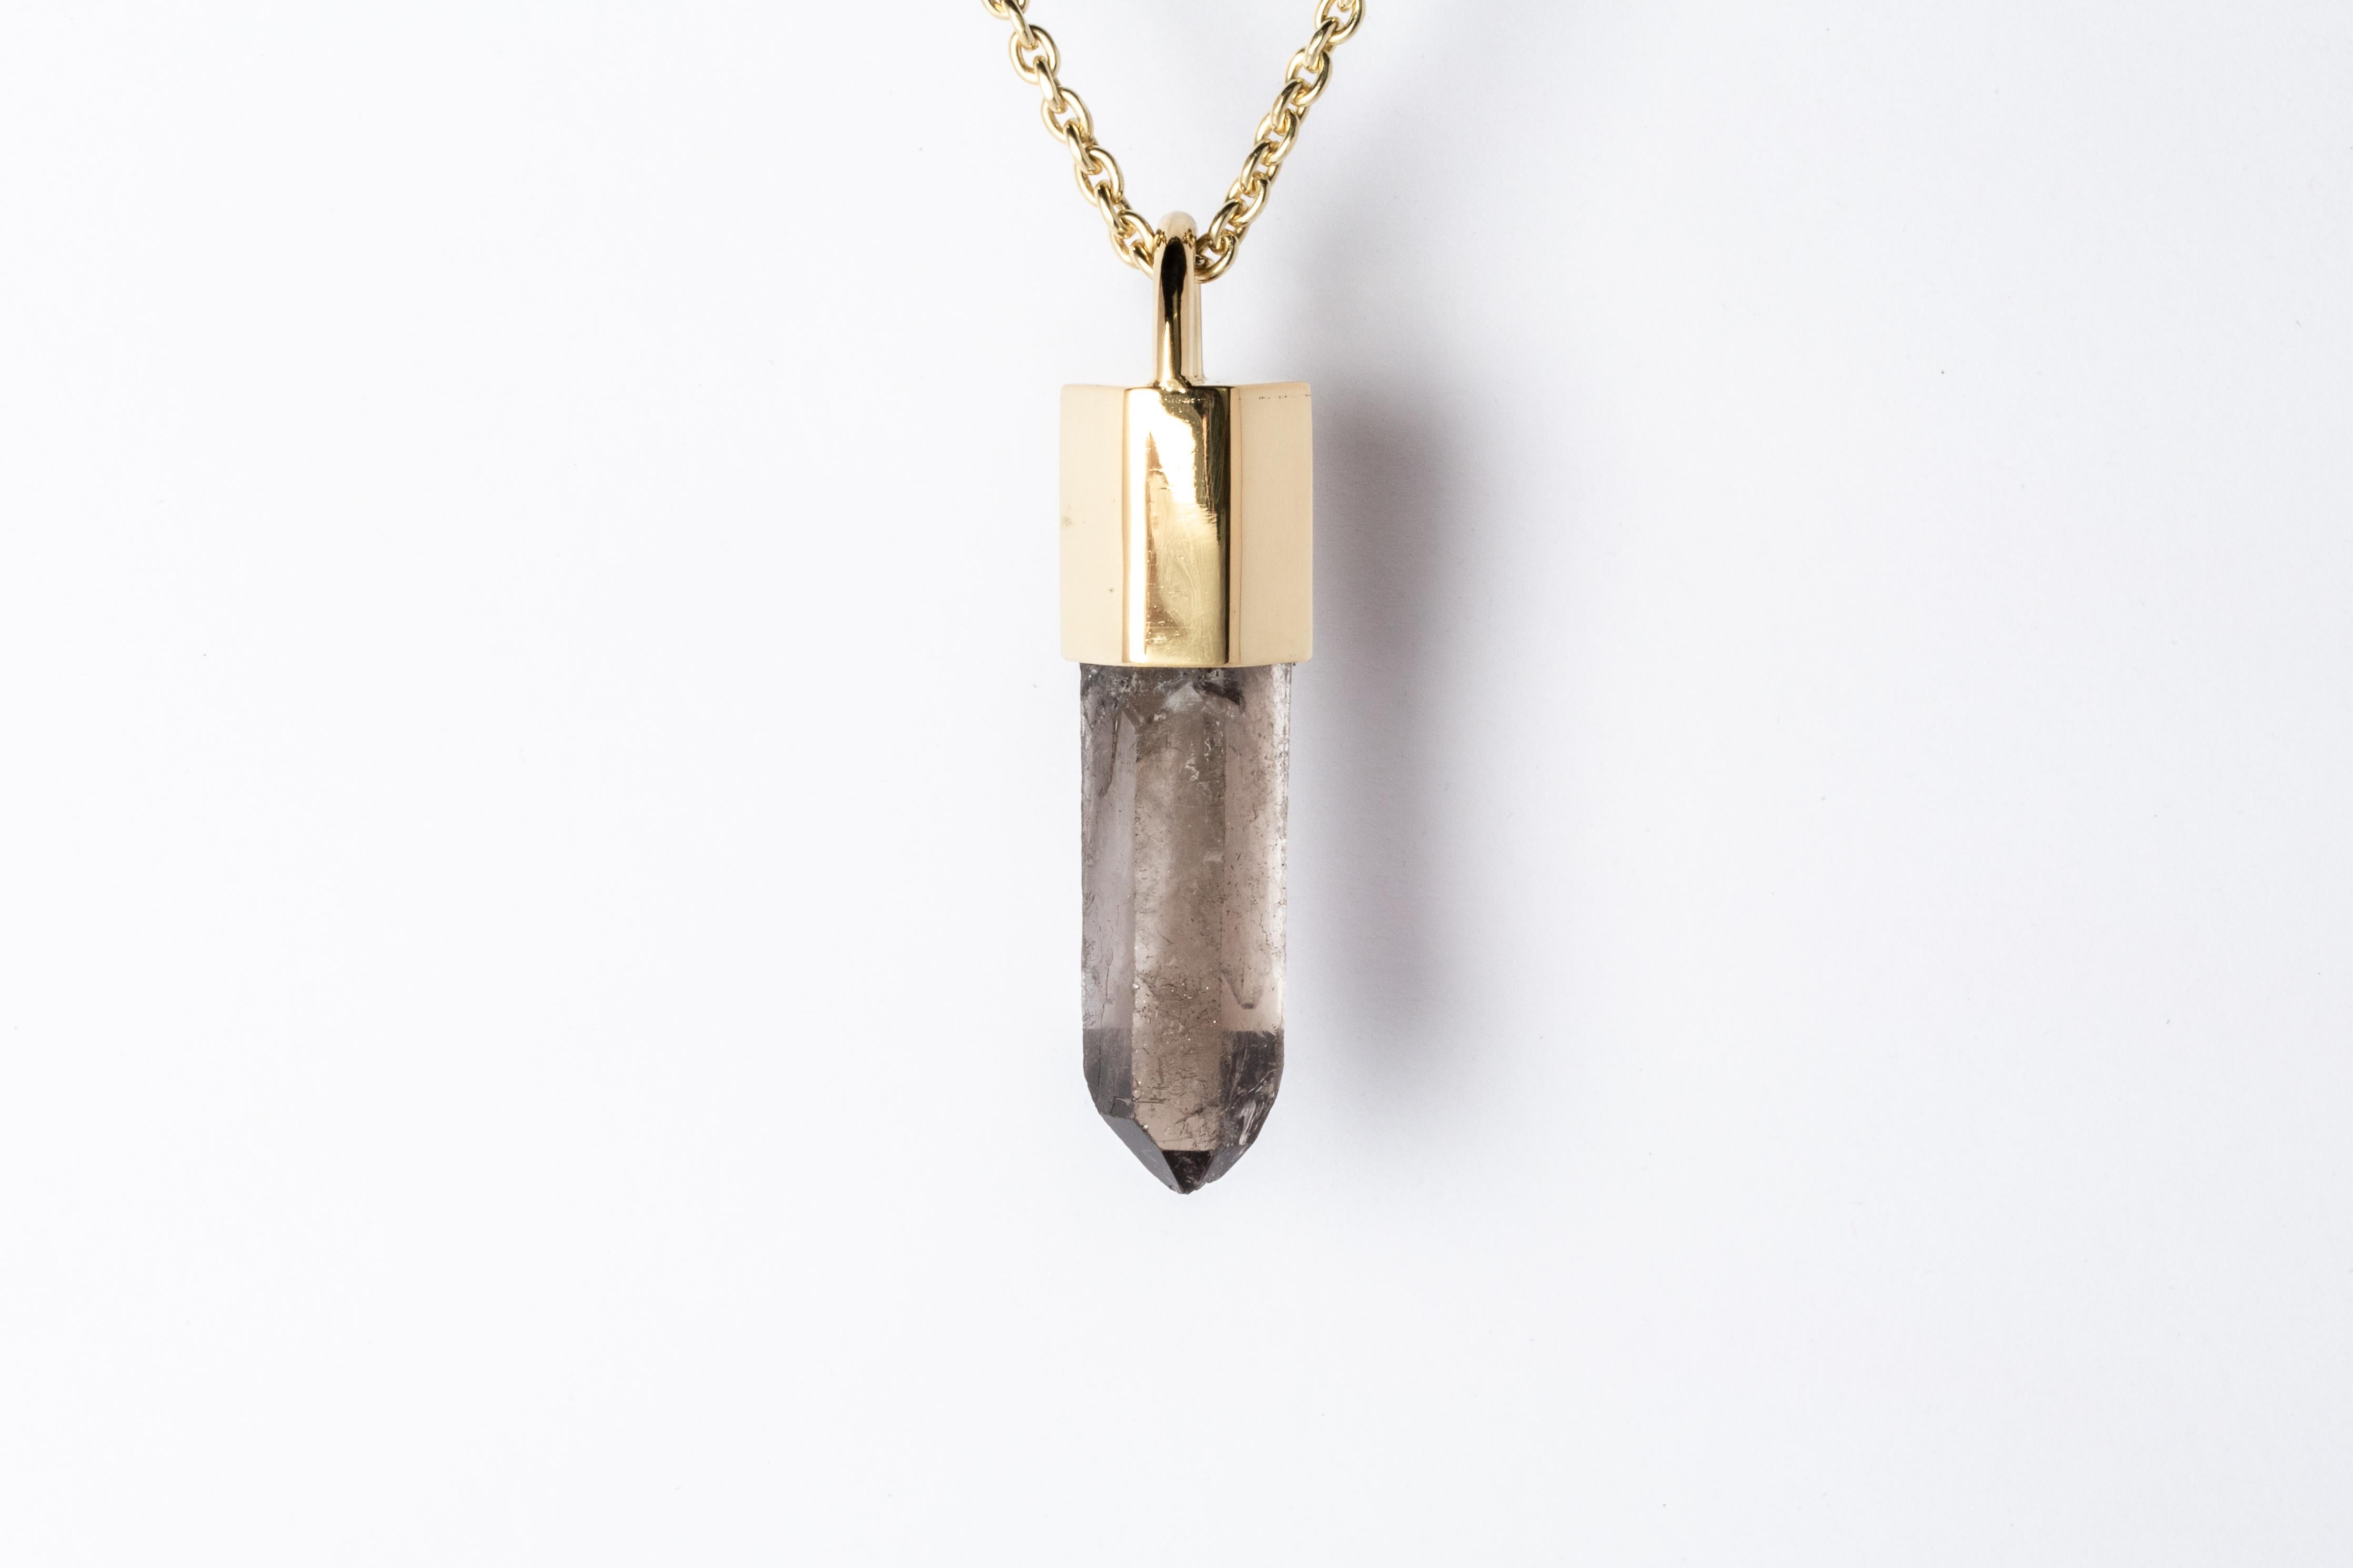 Pendant necklace made in brass, sterling silver, and a rough of Smoky Quartz. Brass and sterling silver are substrate, polished, and electroplated with 18k gold. It comes on 74 cm sterling silver chain.

The Talisman series is an exploration into